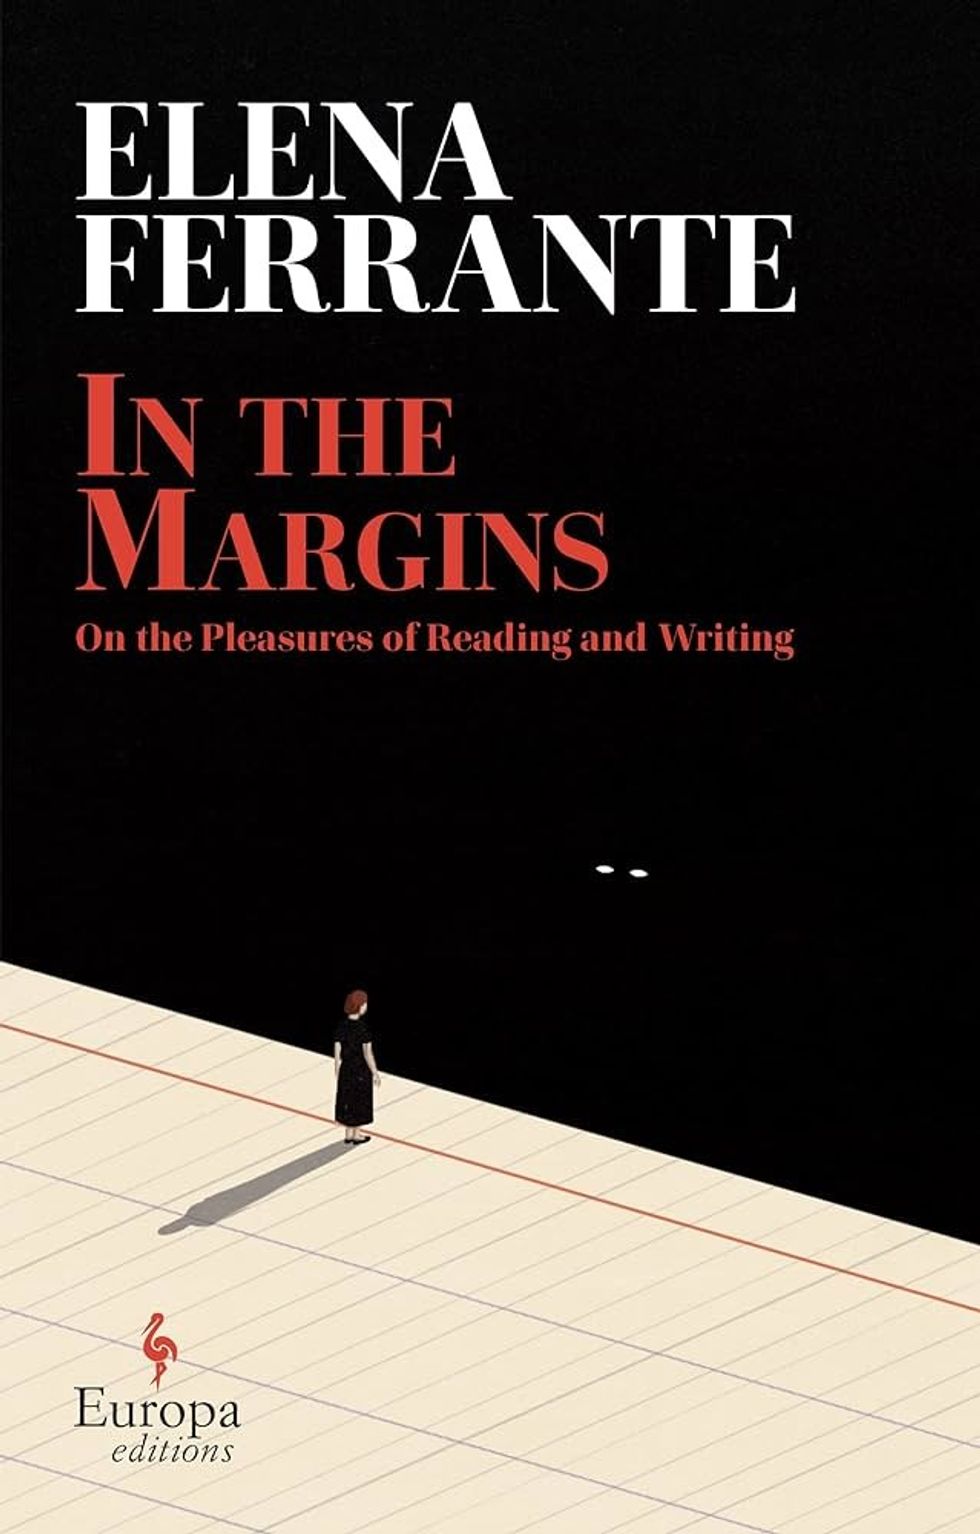 In The Margins: On the Pleasures of Reading & Writing by Elena Ferrante